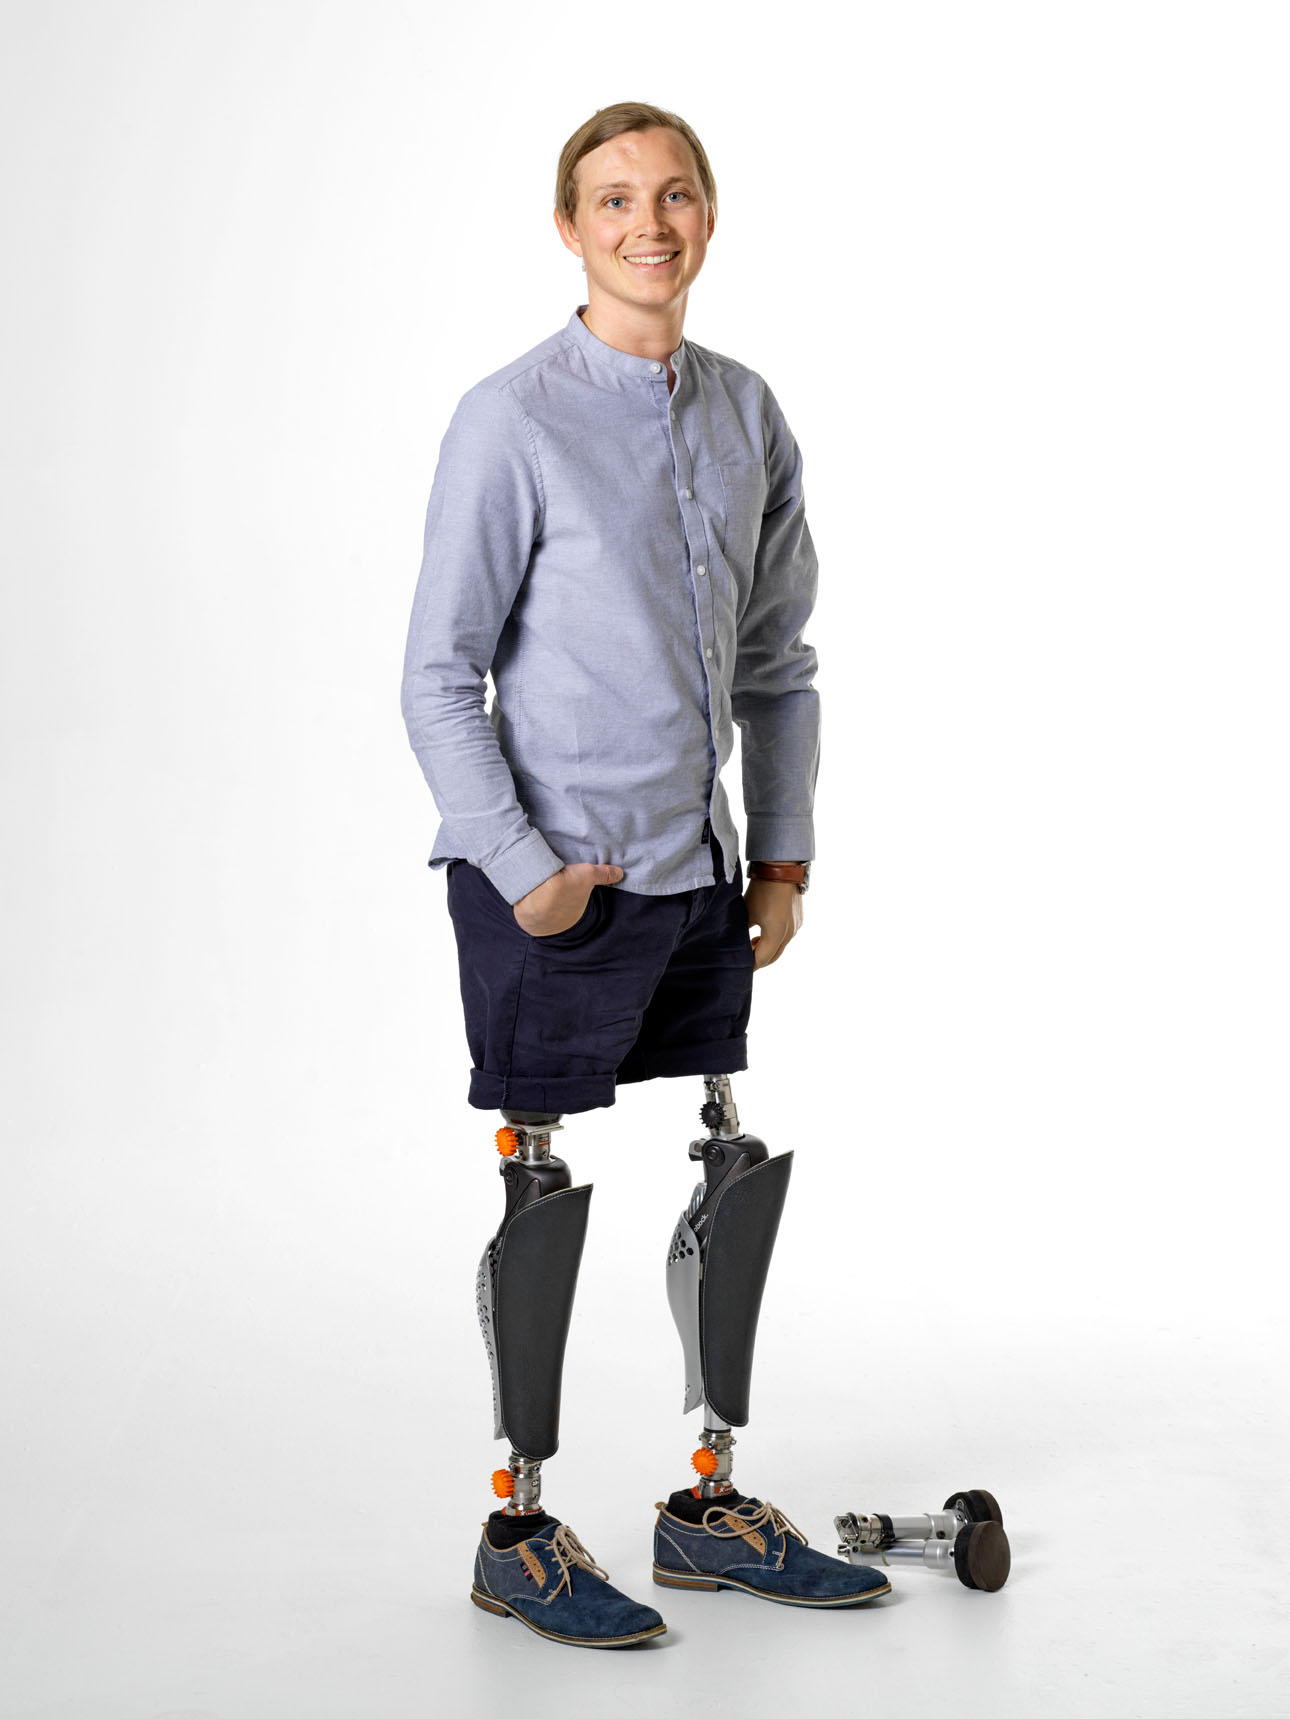 Christoffer Lindhe in a blue shirt with shorts standing on his long prosthetic legs